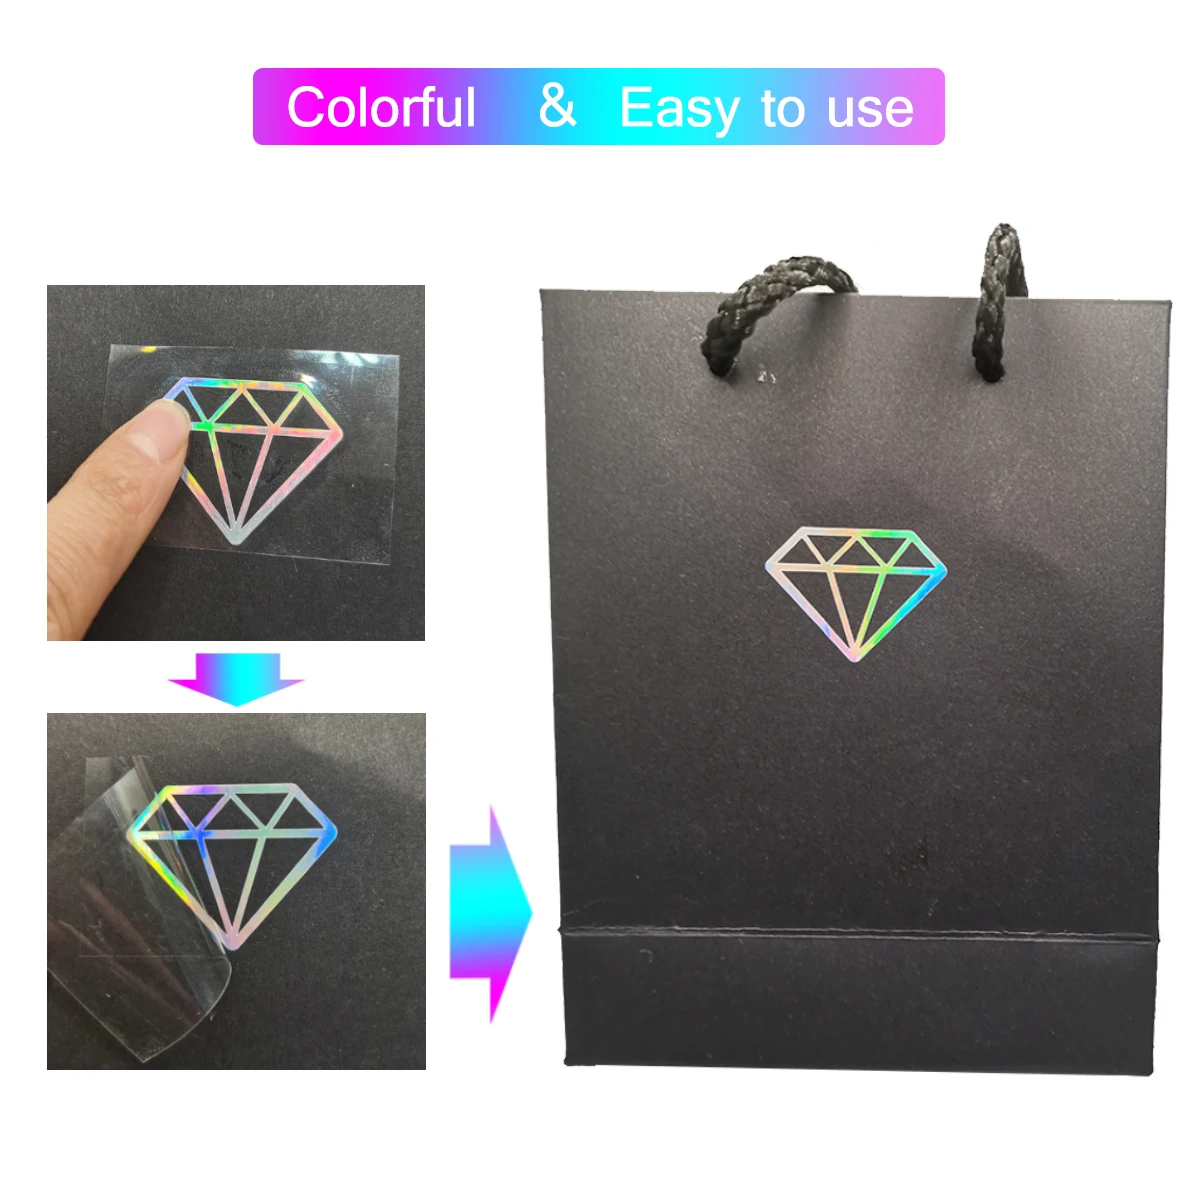 personalized custom holographic transfer 3D sticker self-adhesive transparent label waterproof glitter logo colorful shiny decal images - 6